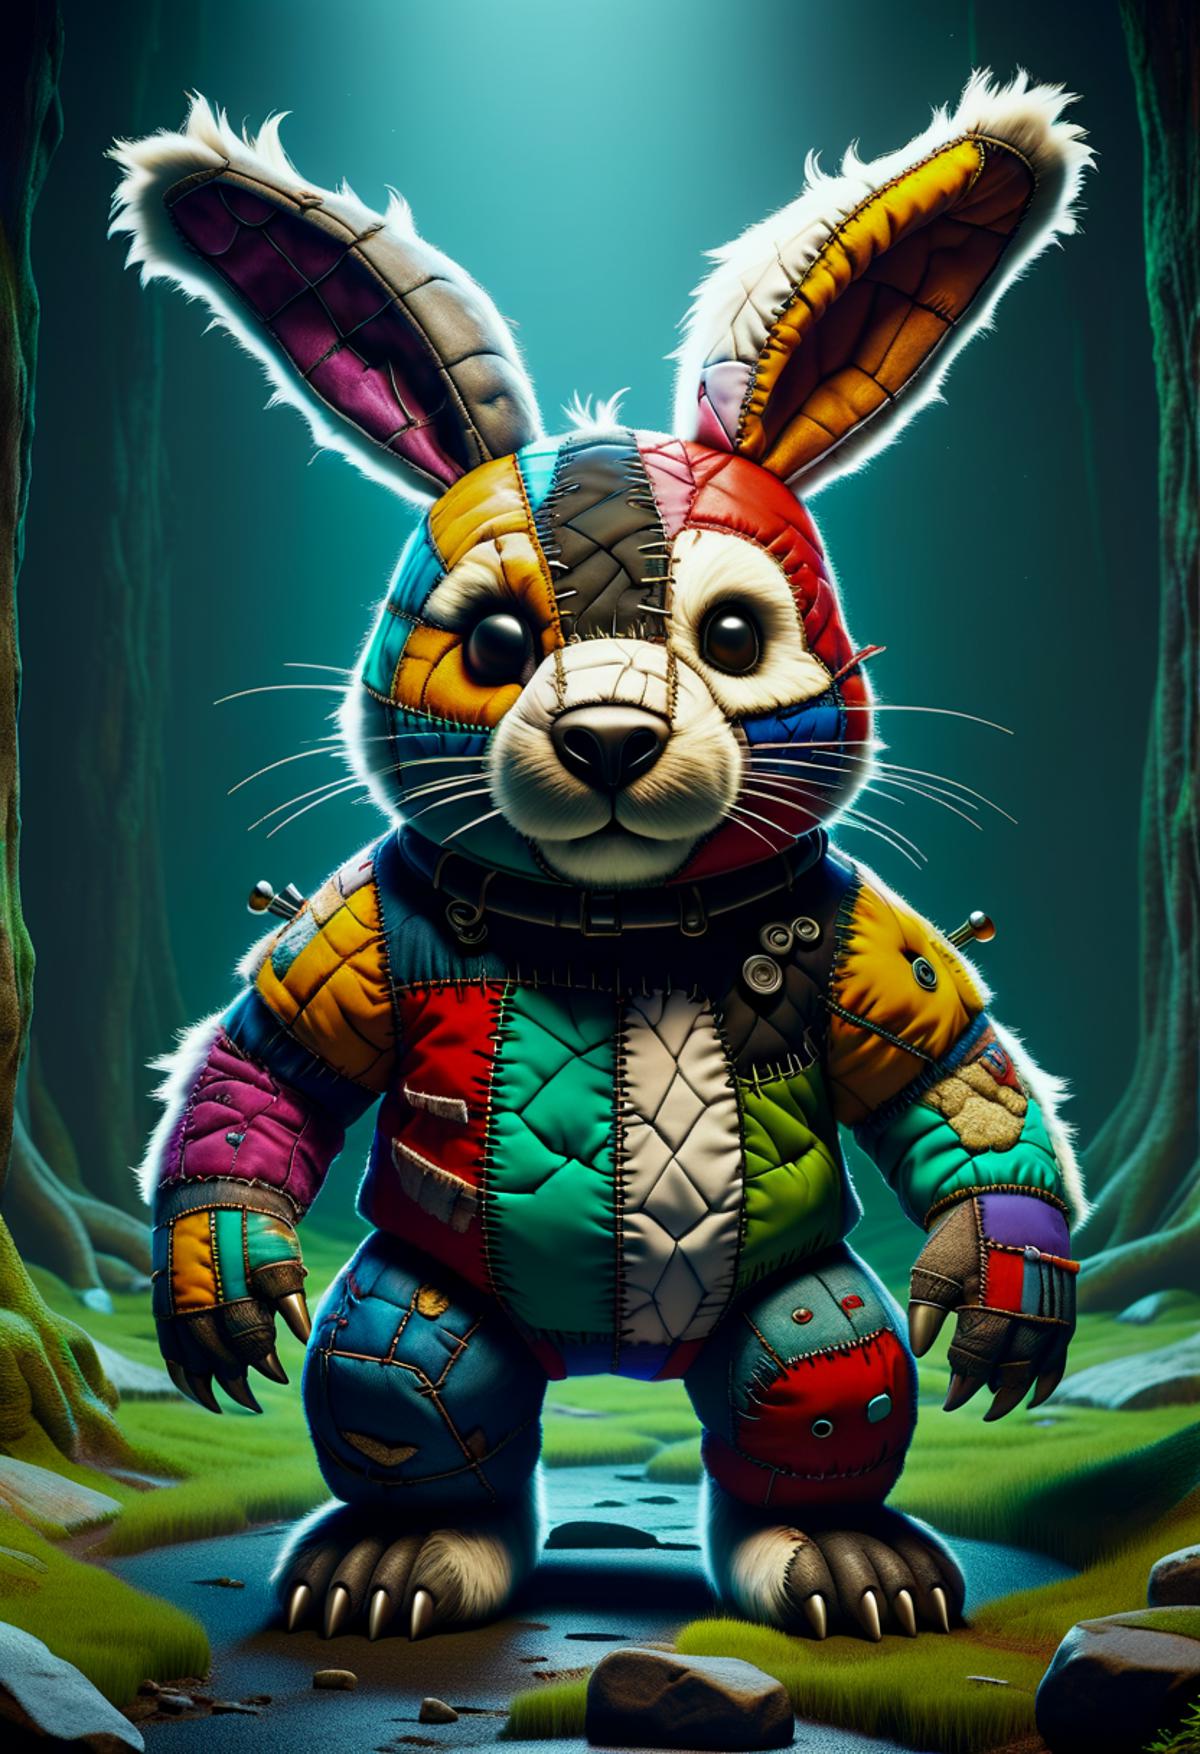 A colorful and quilted stuffed animal bunny with a jacket.